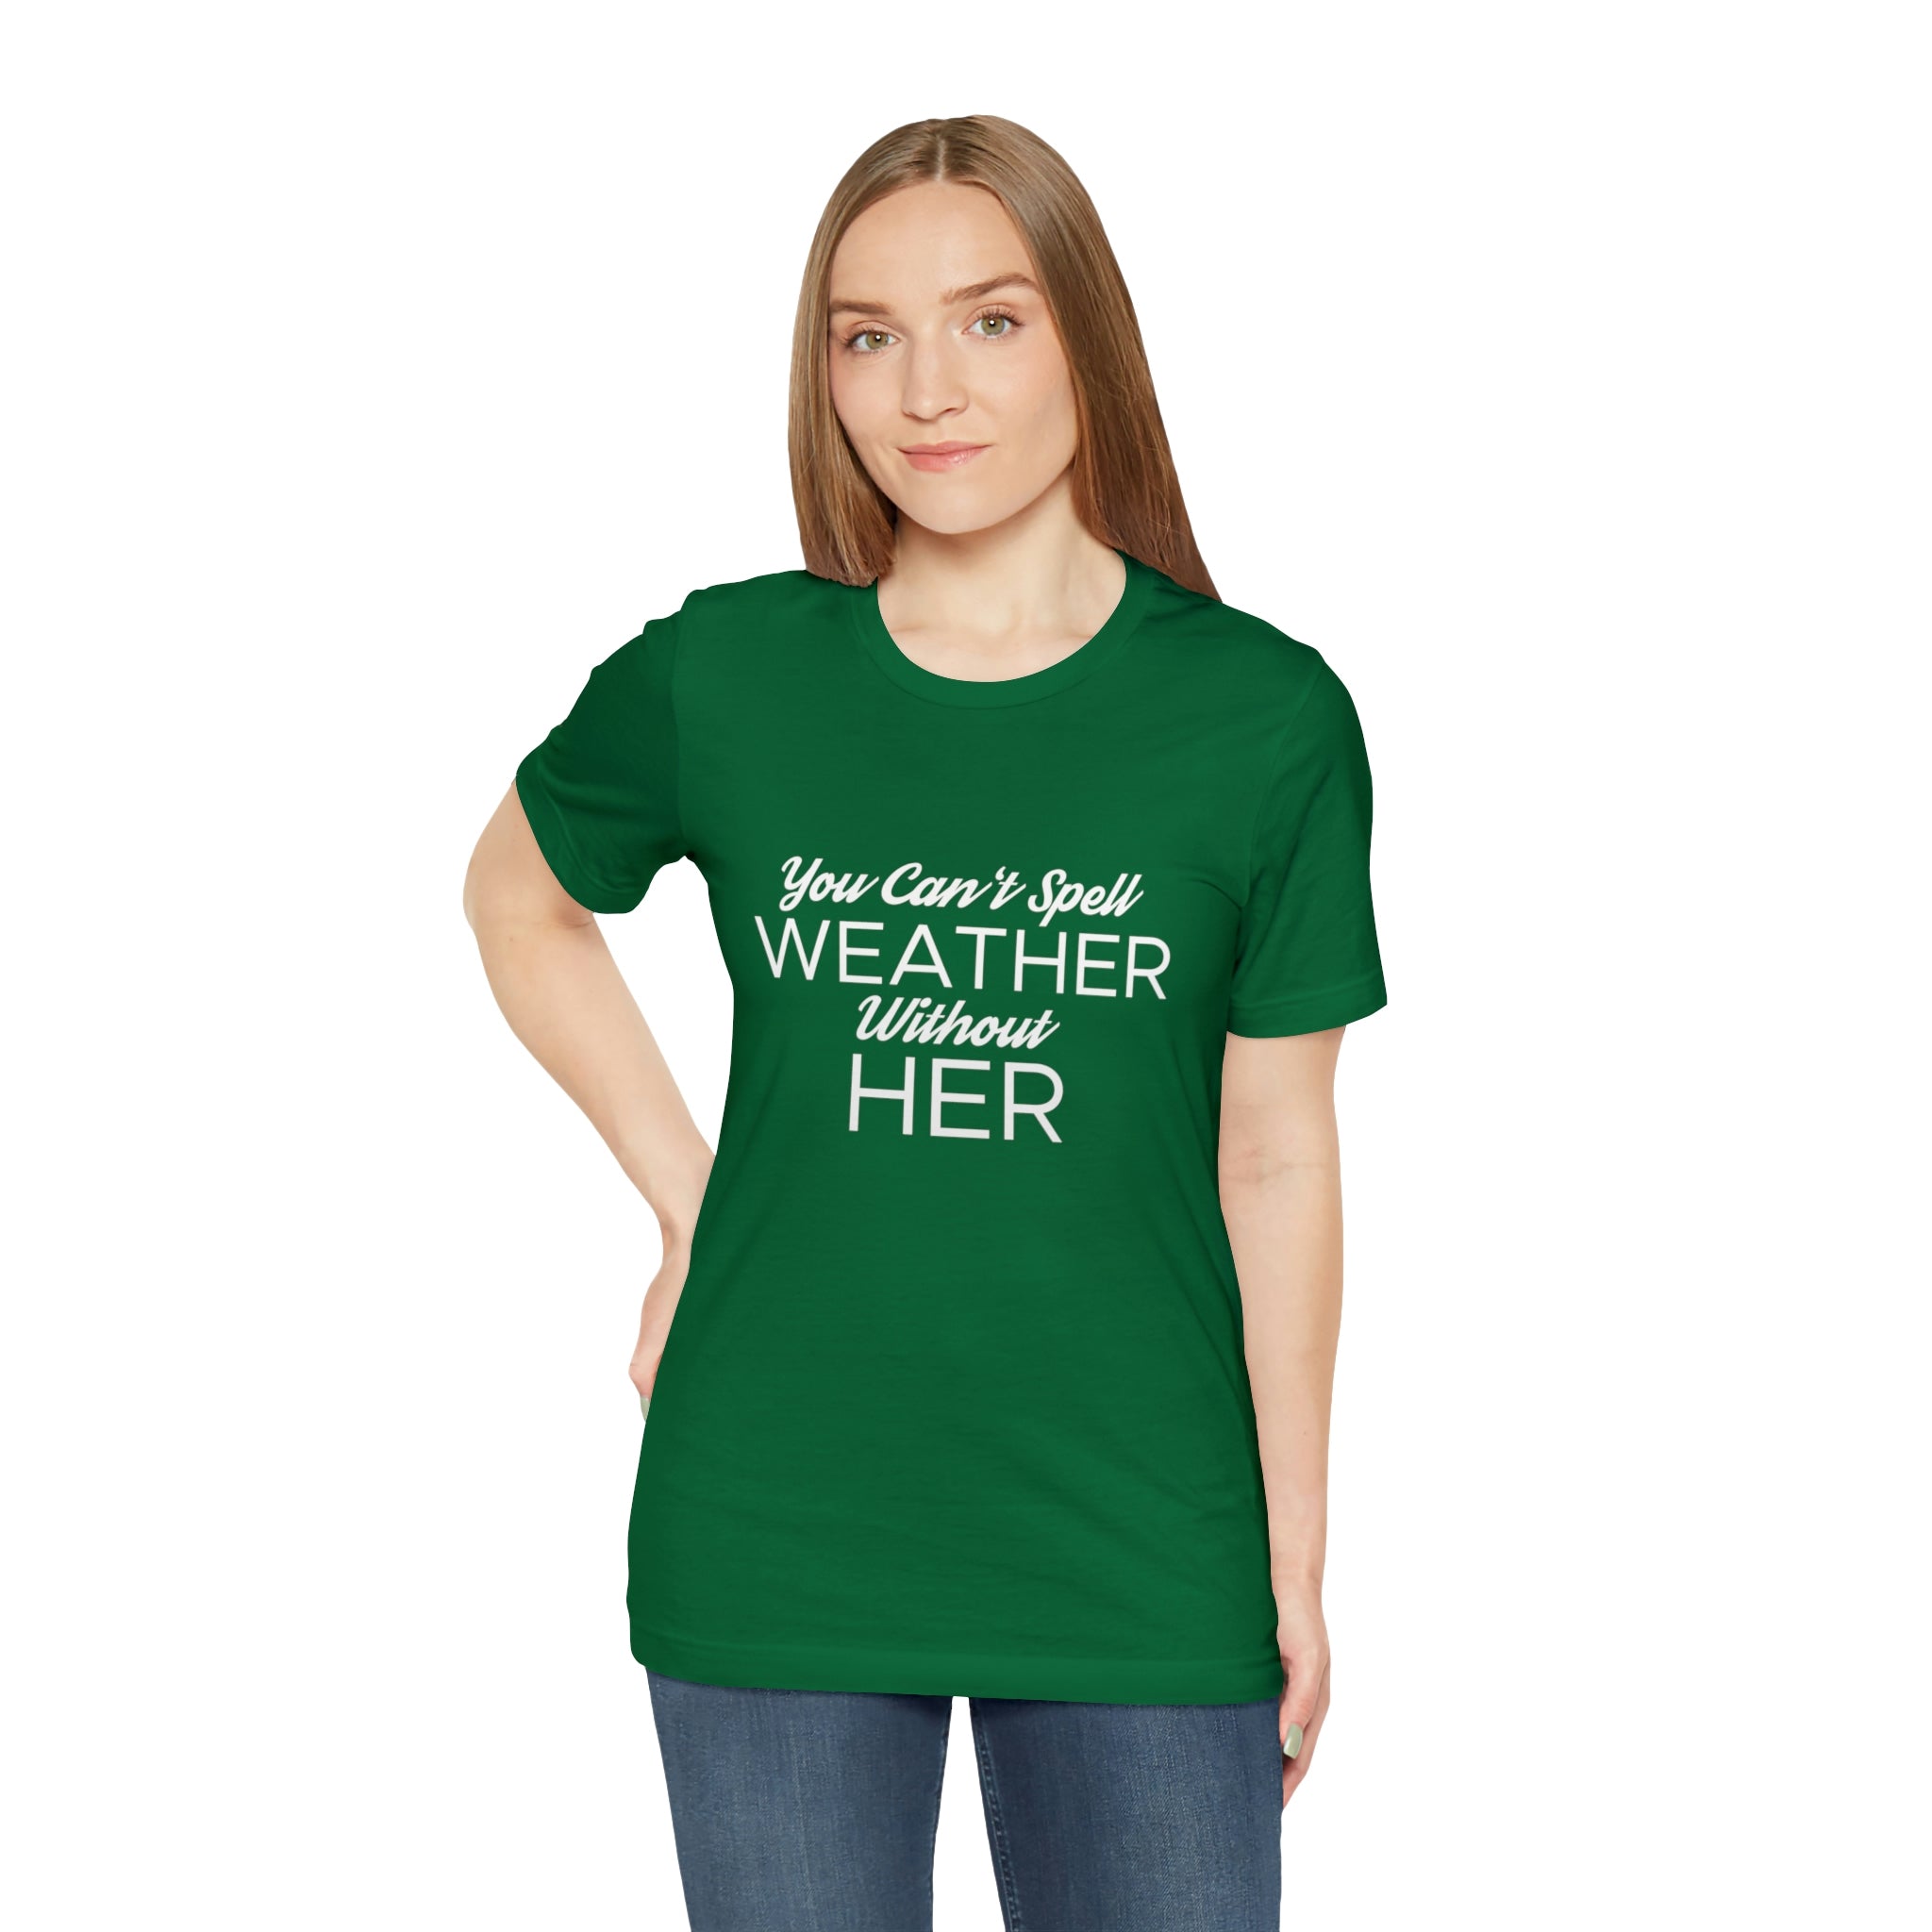 You can't spell weather without her Tee 